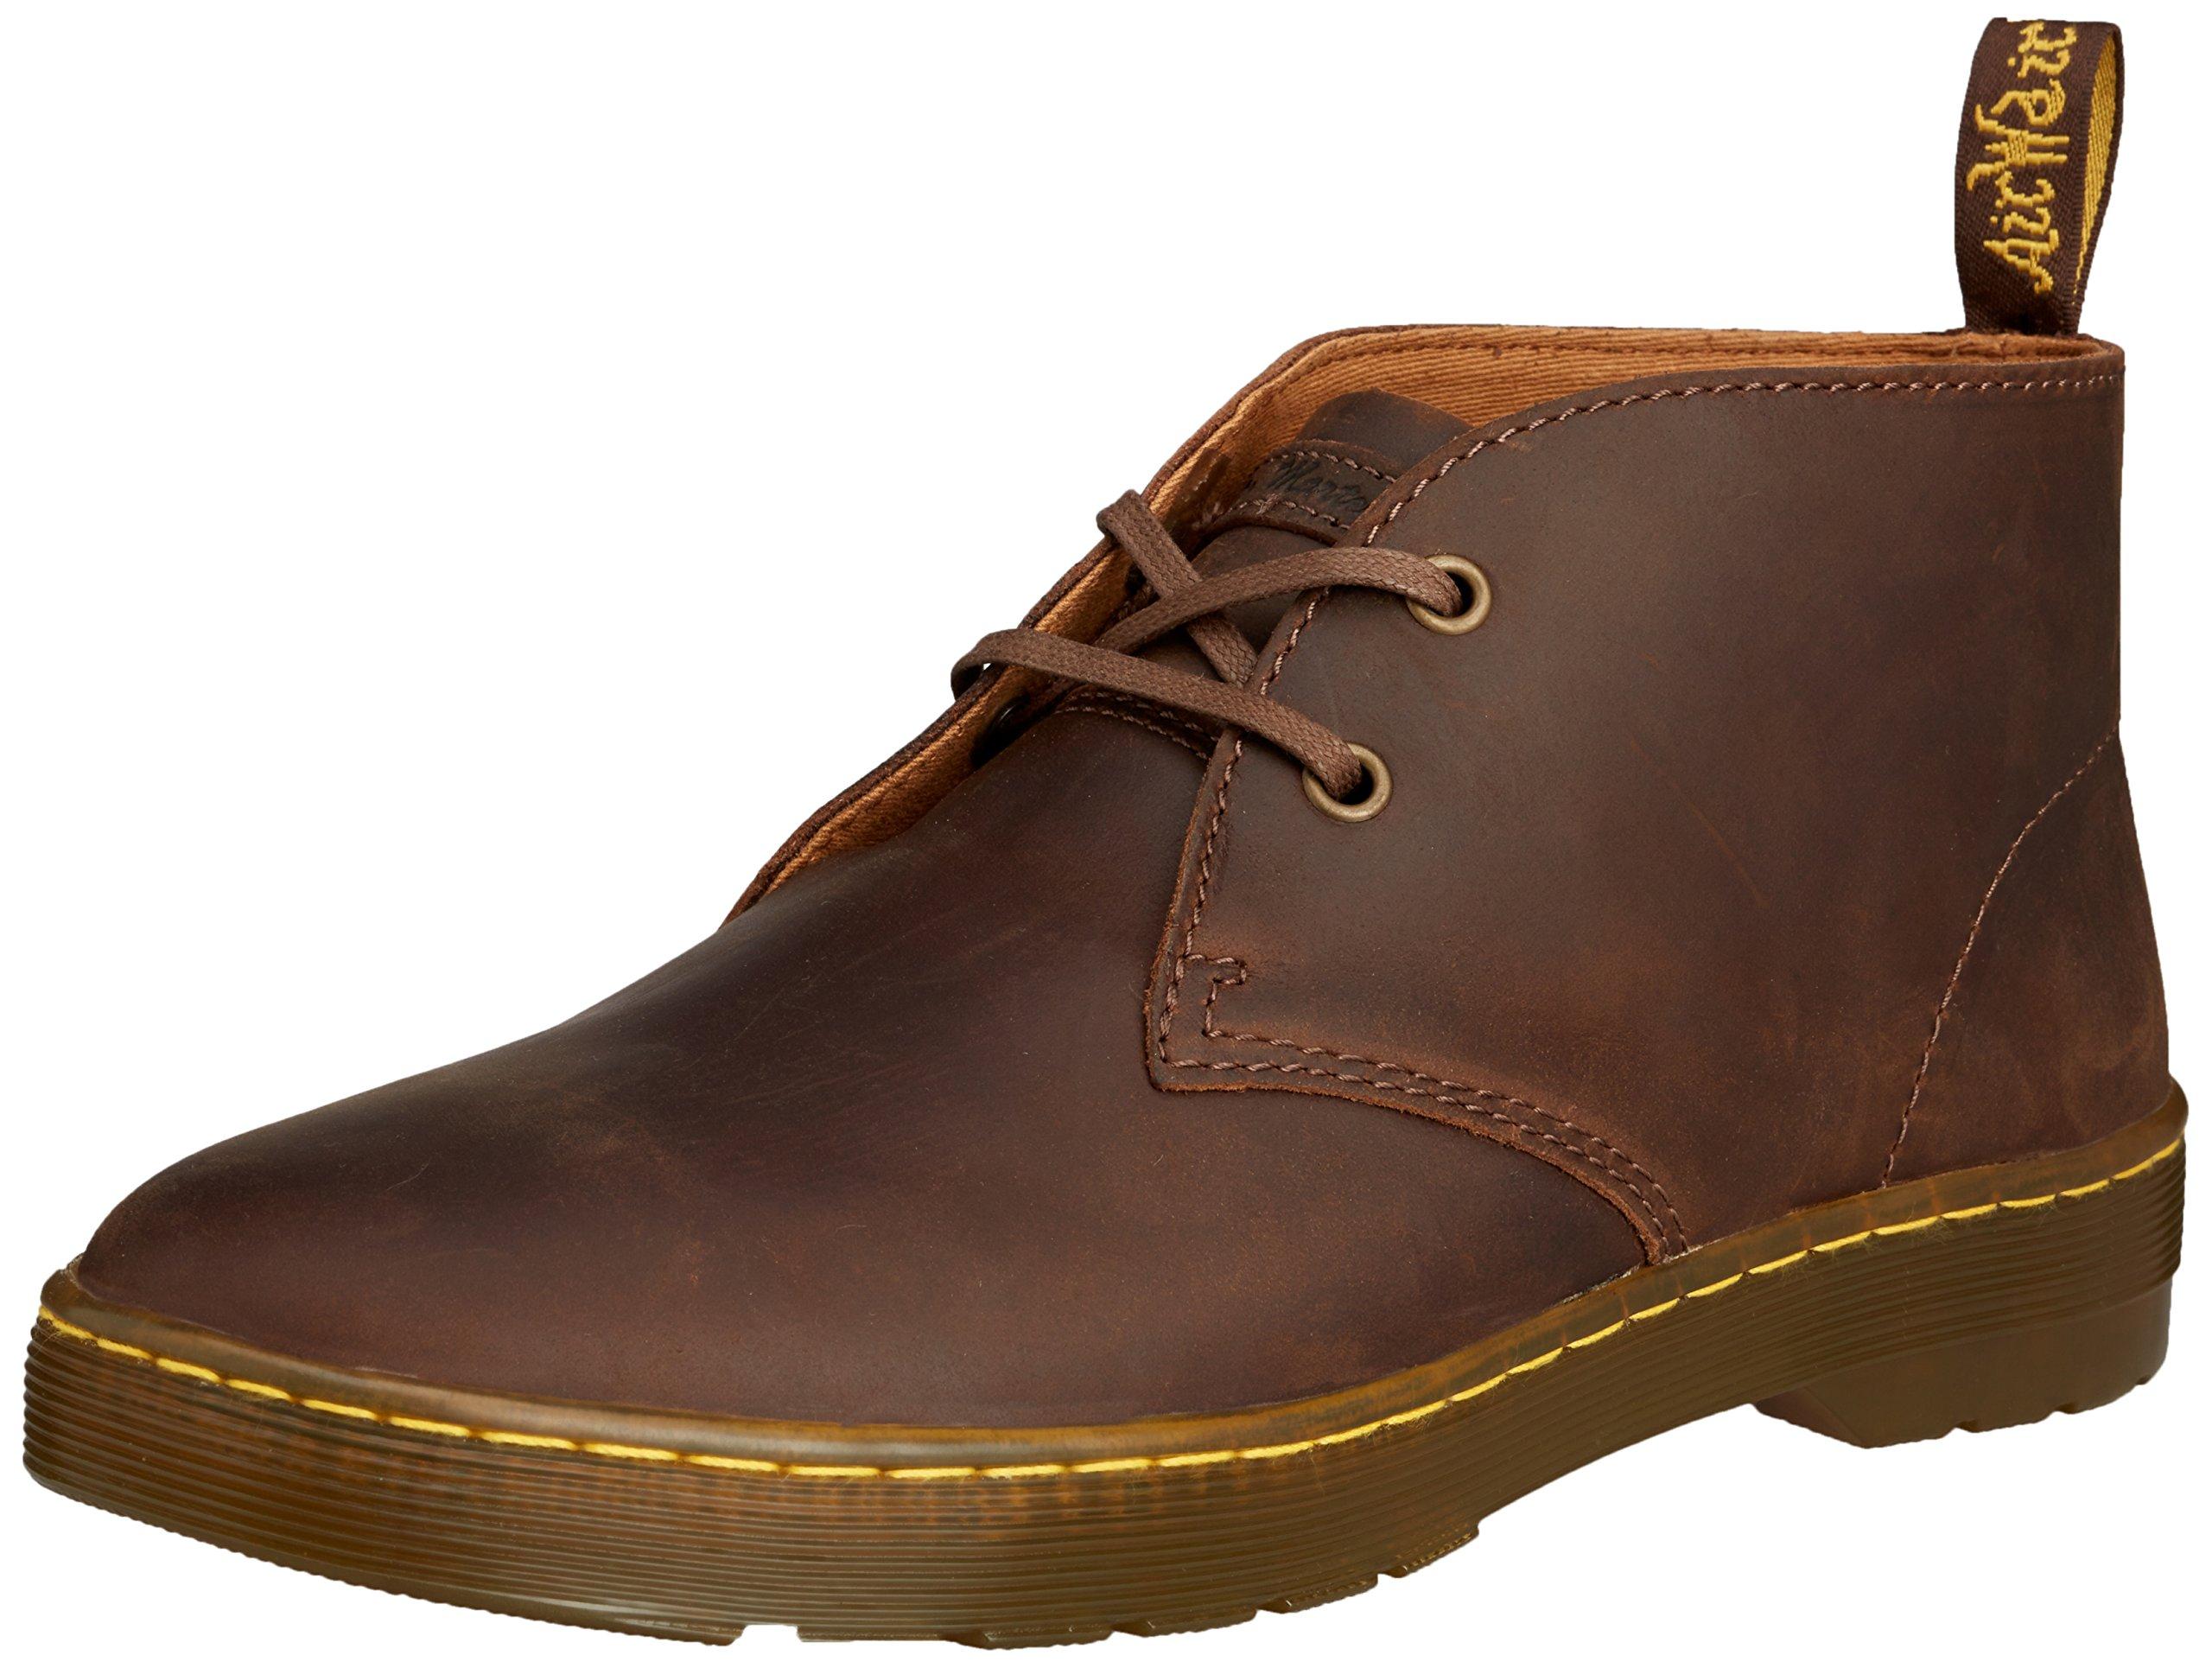 Dr. Martens Leather Cabrillo Chukka Boot in Brown for Men - Save 23% - Lyst